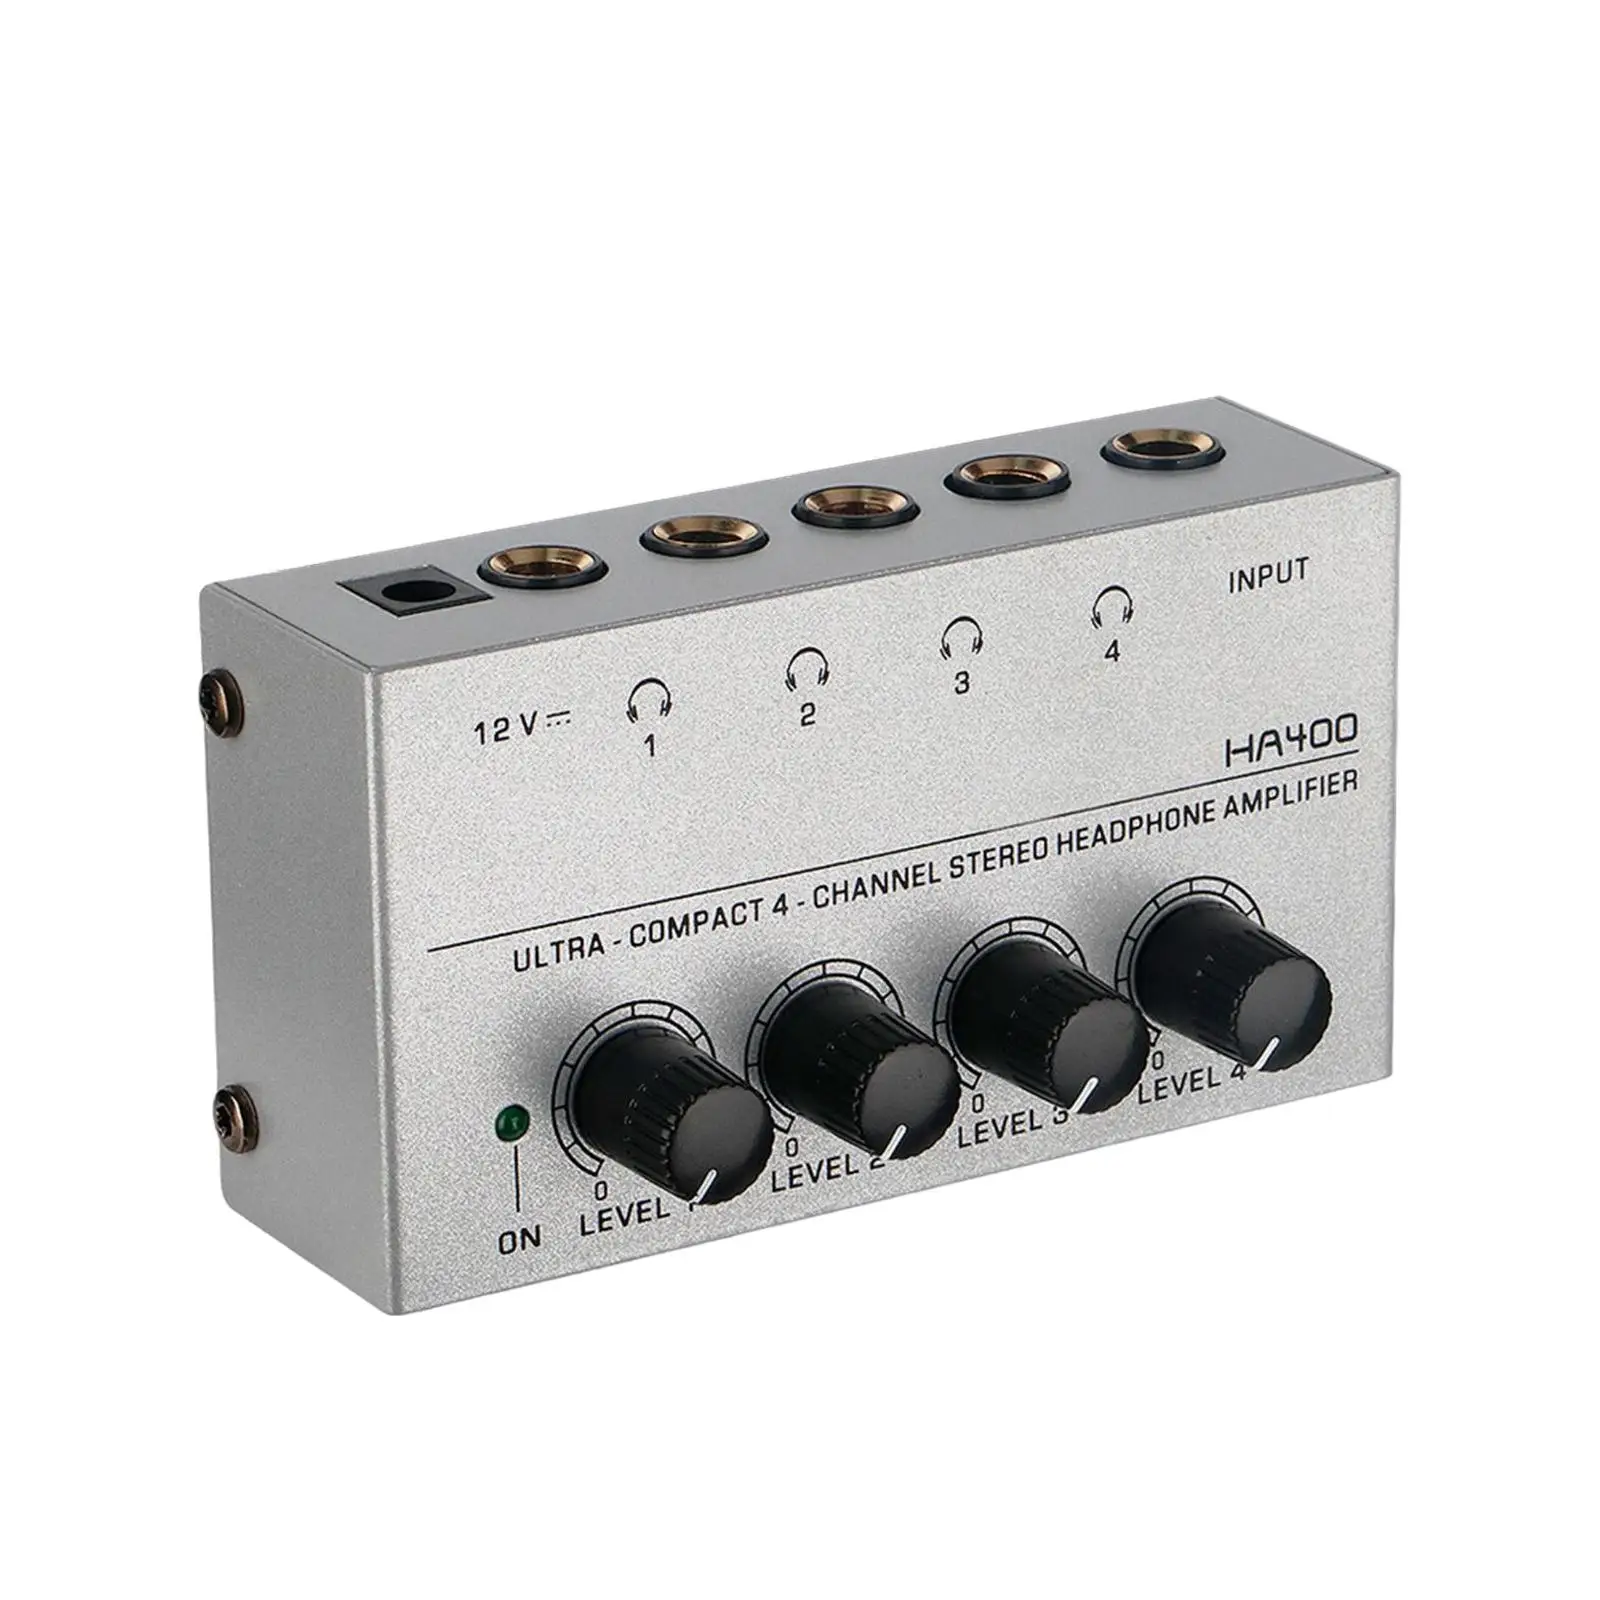 4 Channel Headphone Amp Sound Mixer stereo Low Noise Clear Sound Compact for Sound Reinforcement music